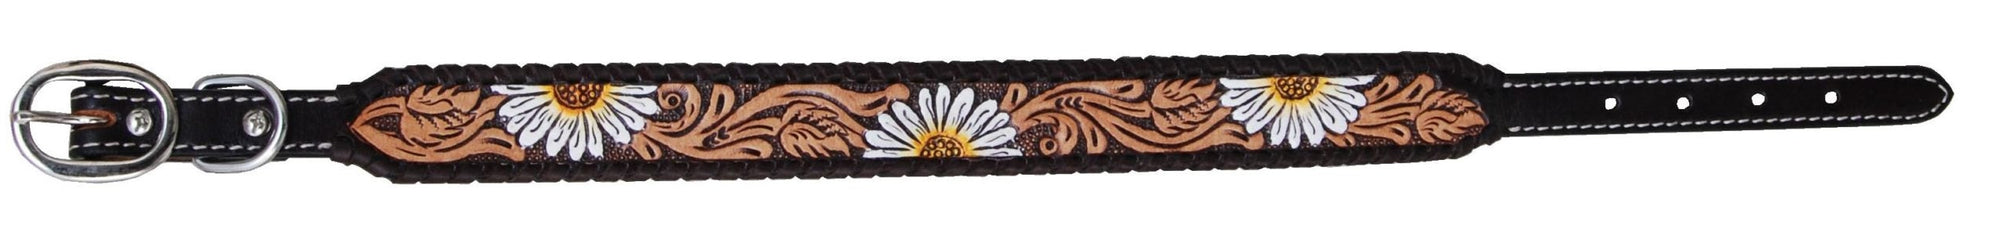 Rafter T Ranch Co Tooled/Hand Painted Dog Collar STYLE RTDC380-L